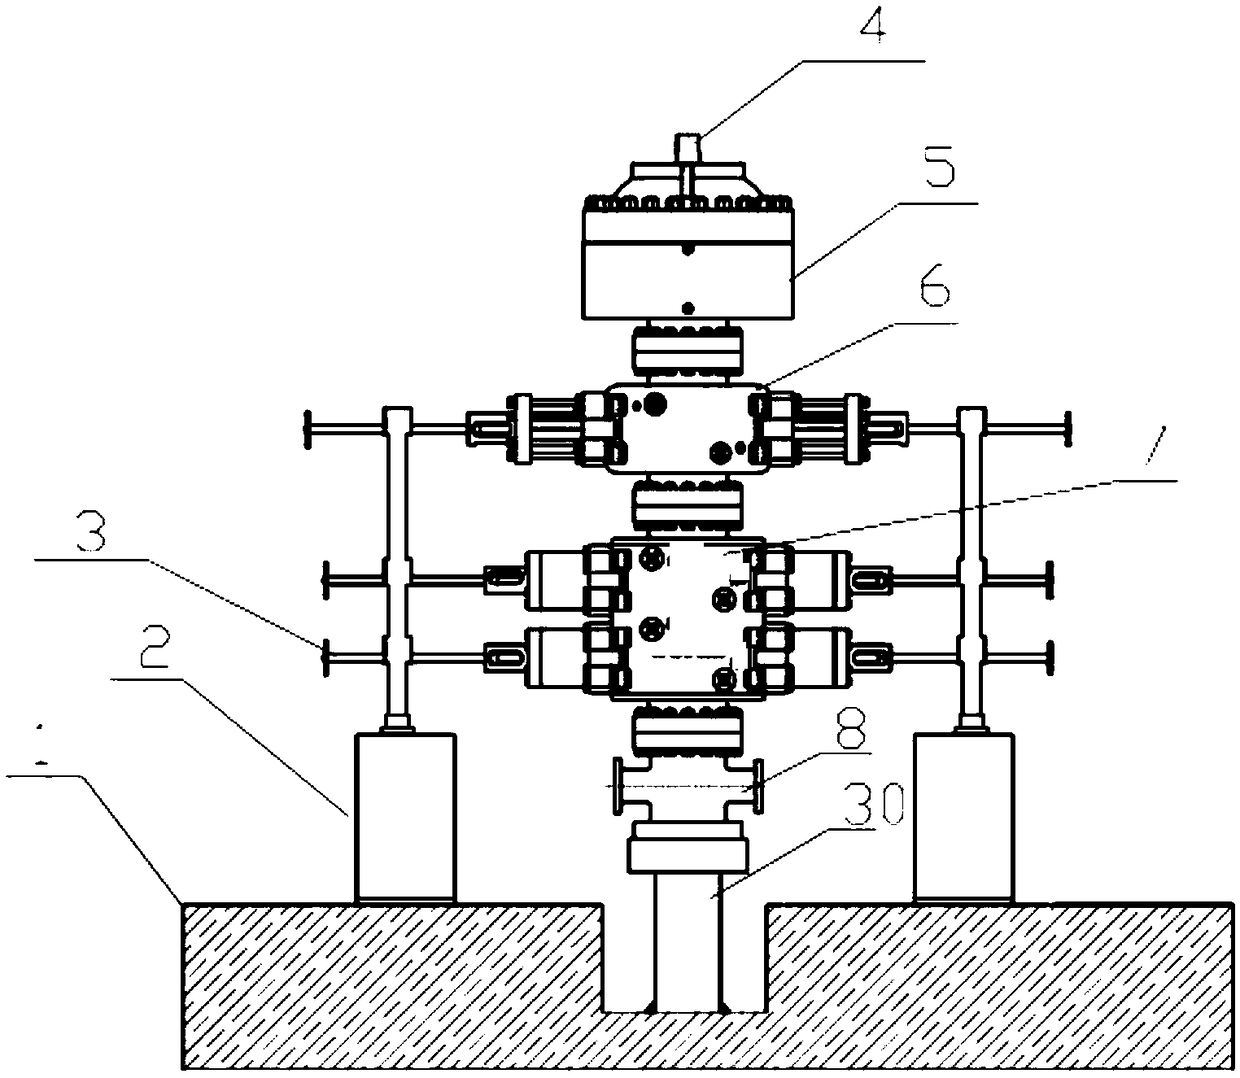 A teaching simulation device for a petroleum drilling well control blowout preventer unit